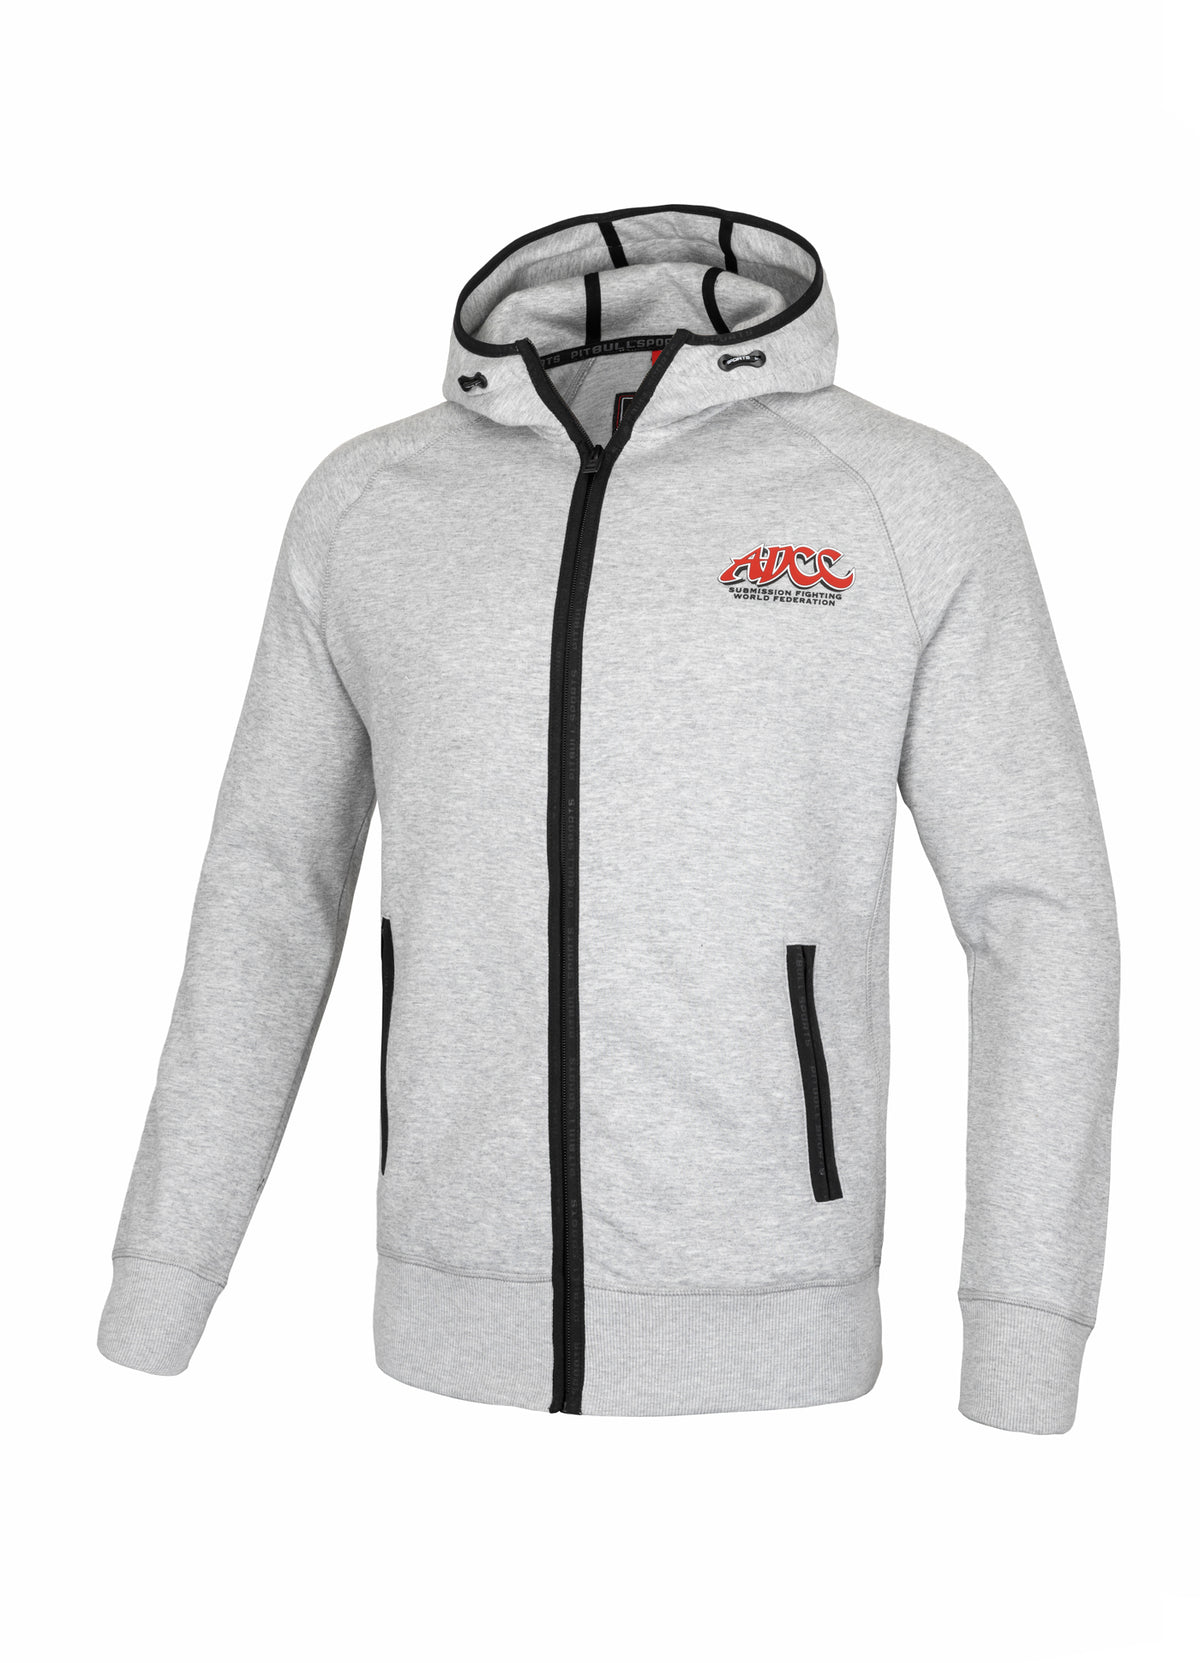 ADCC Grey Hooded Zip